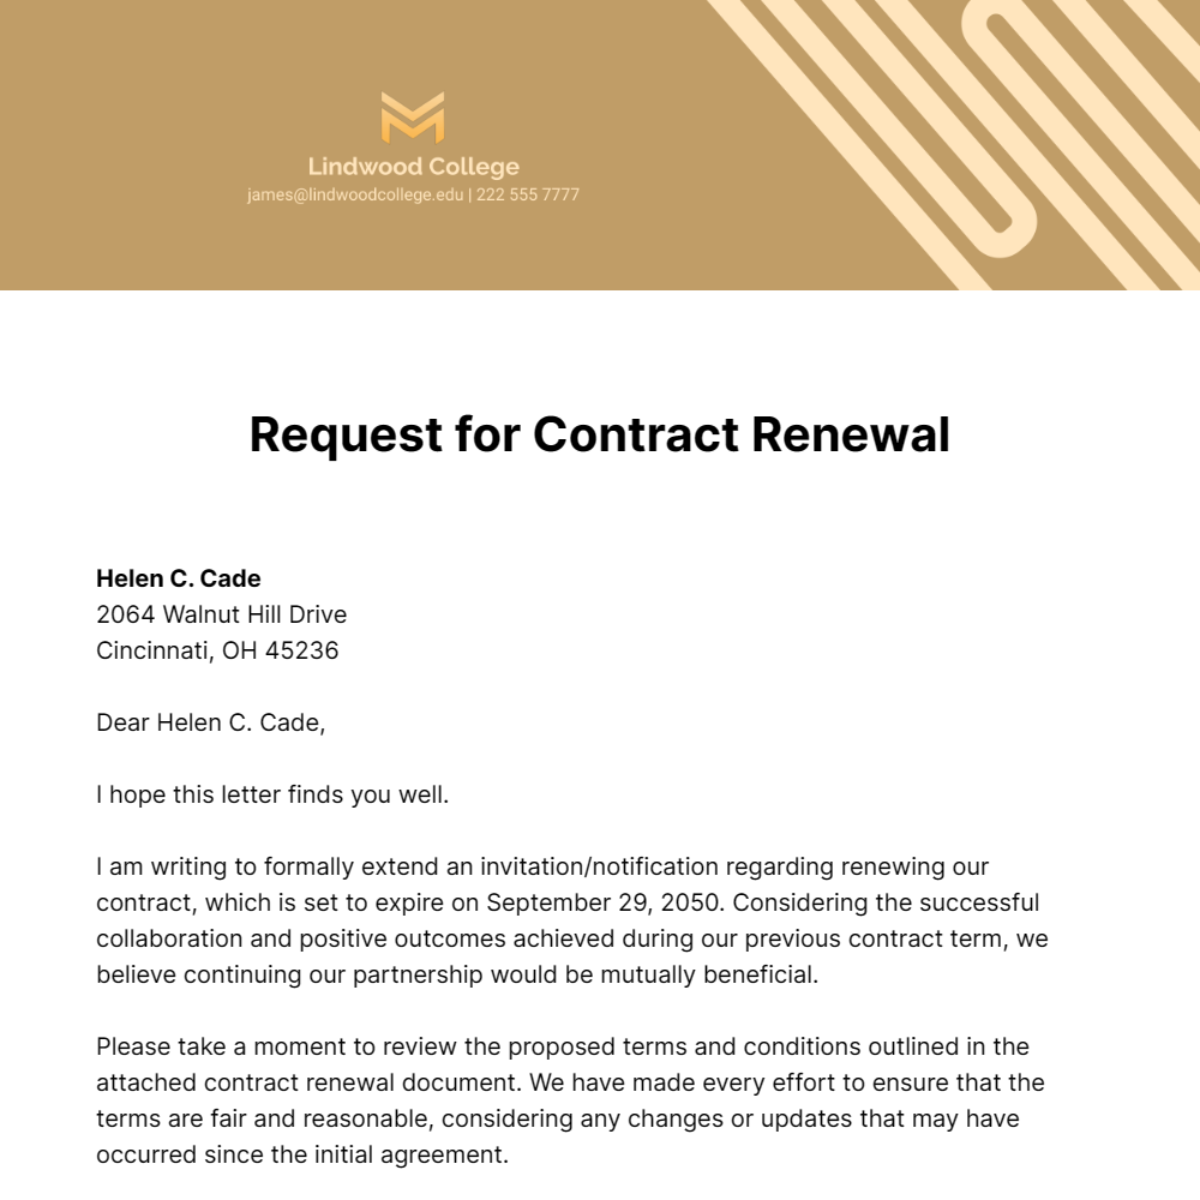 Request for Contract Renewal Letter  Template